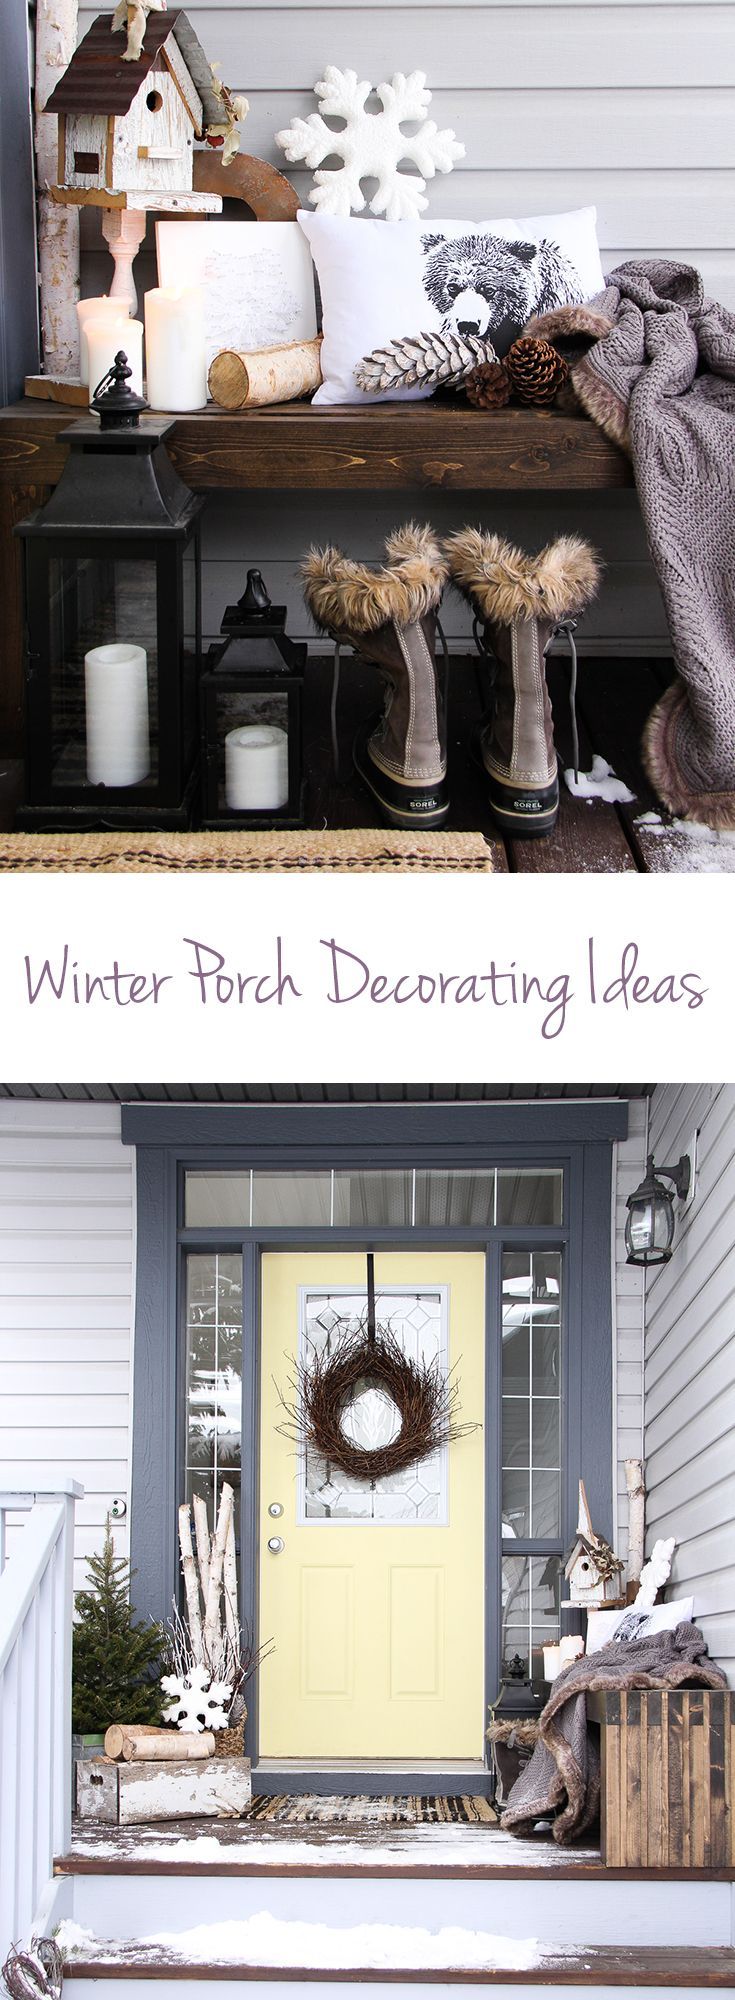 Ideas for Decorating the Porch for Winter